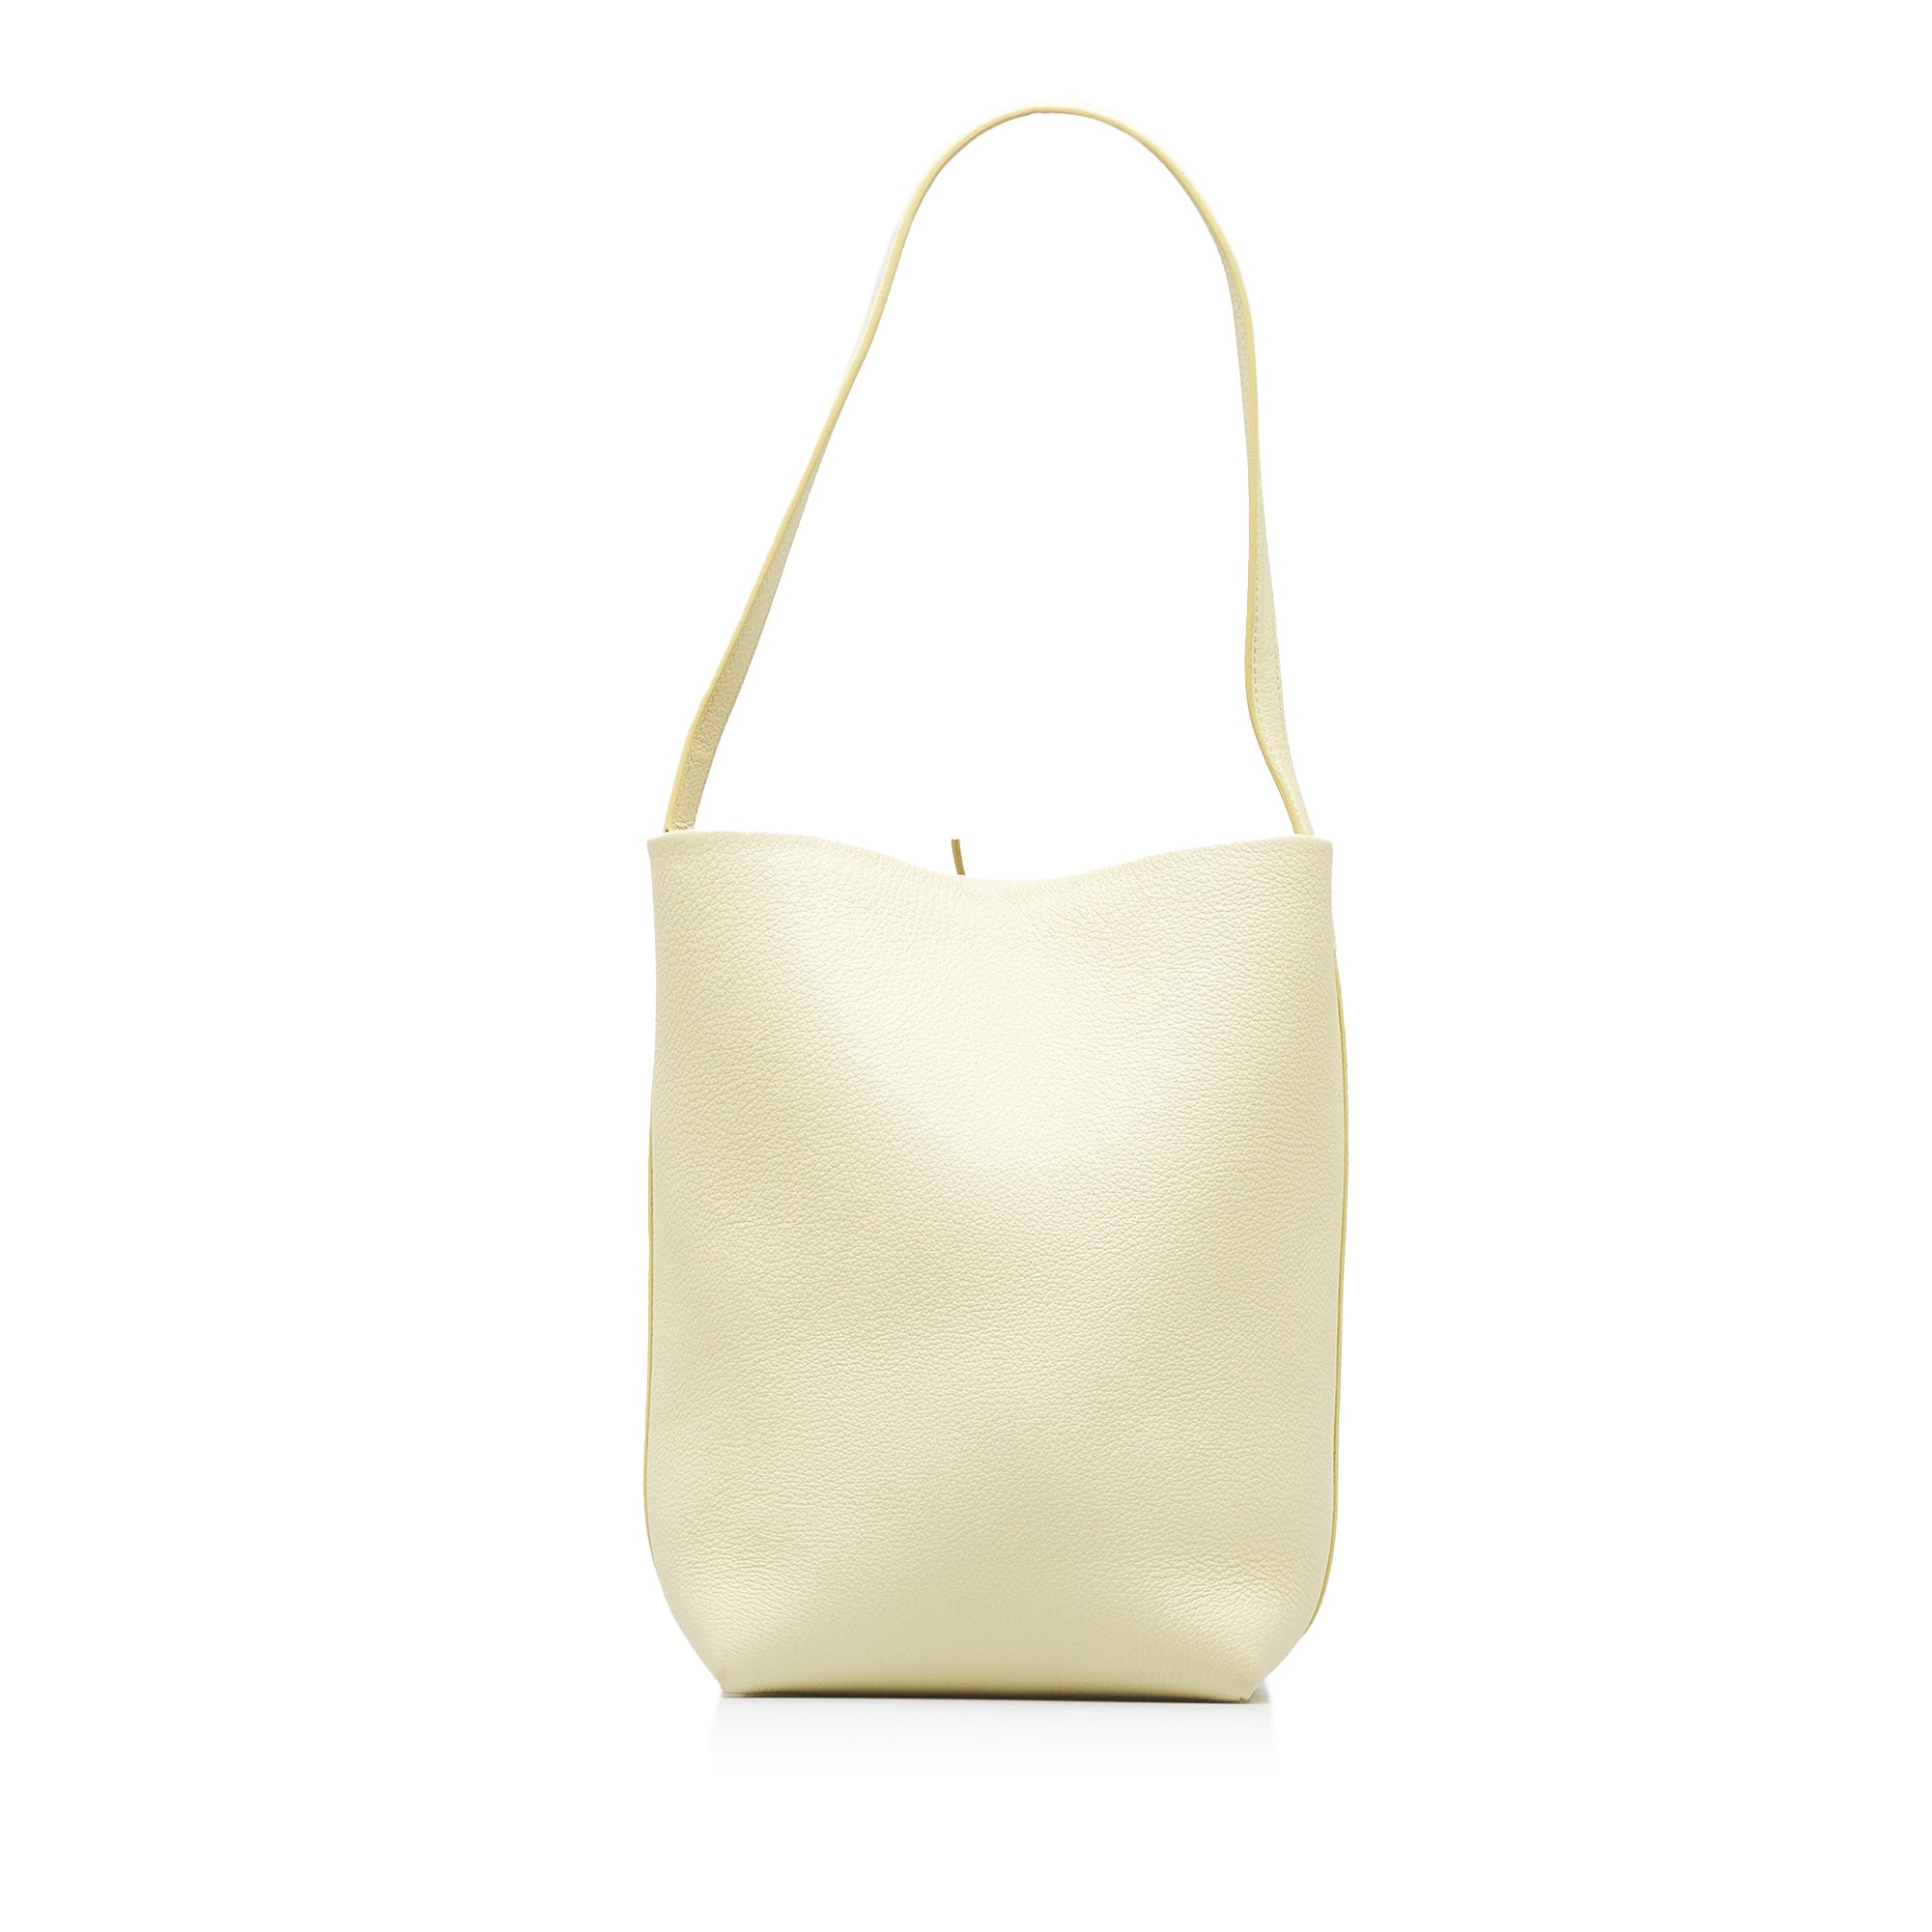 Celine - Authenticated Made in Tote Bag Handbag - Cotton White Plain for Women, Very Good Condition